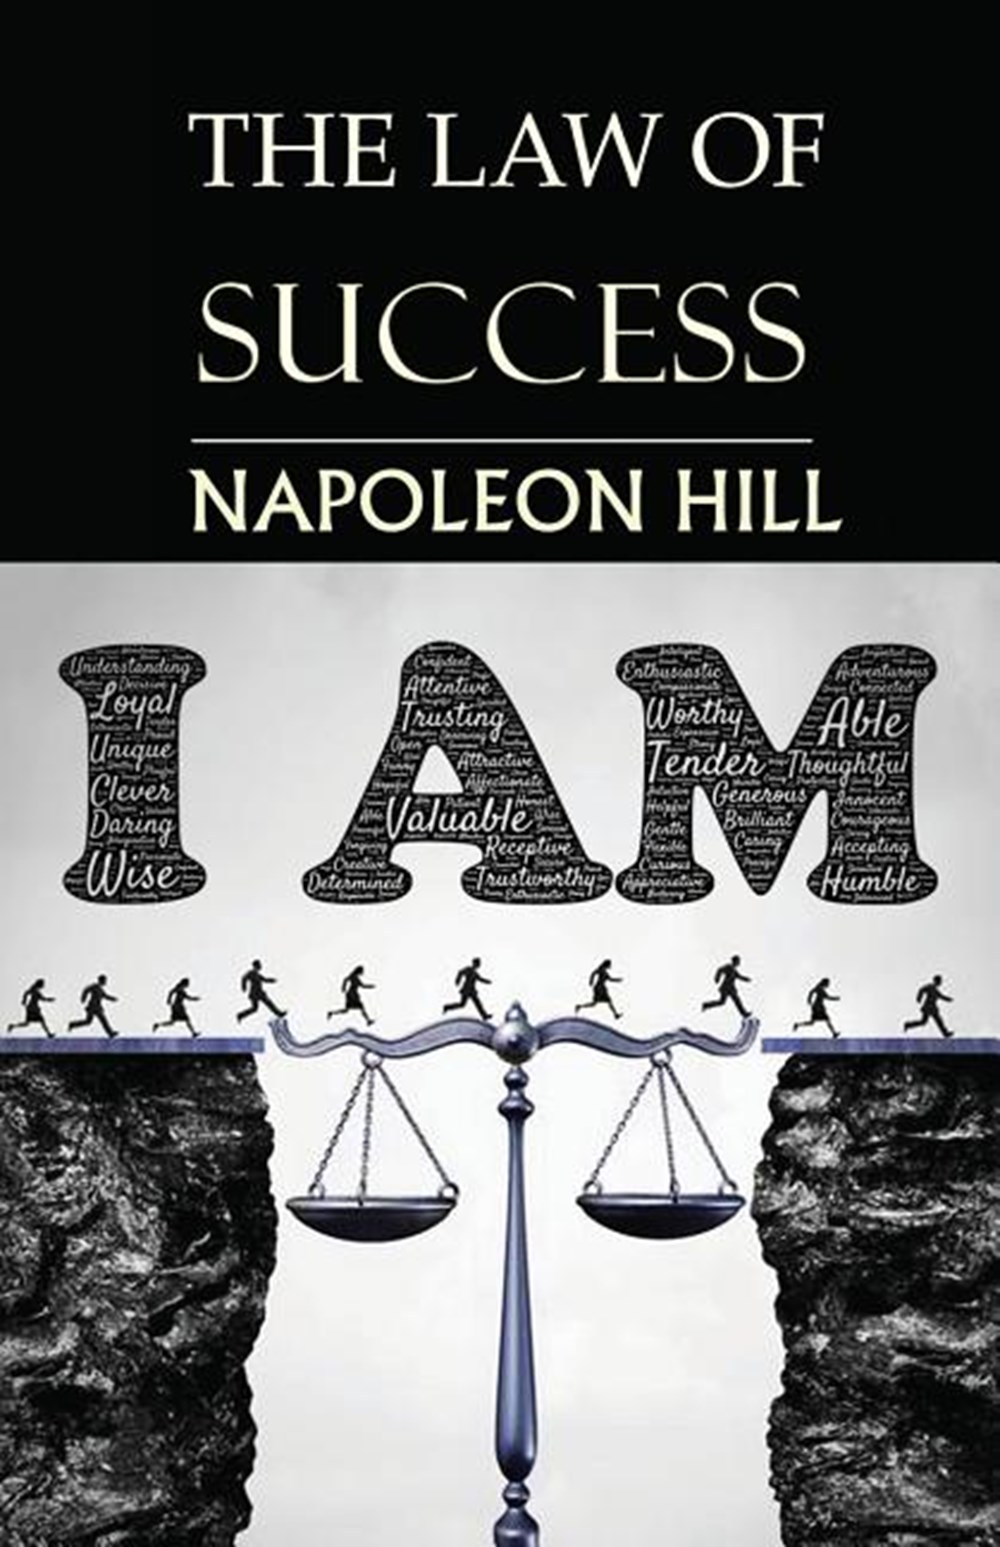 Law of Success You Can Do It, if You Believe You Can!